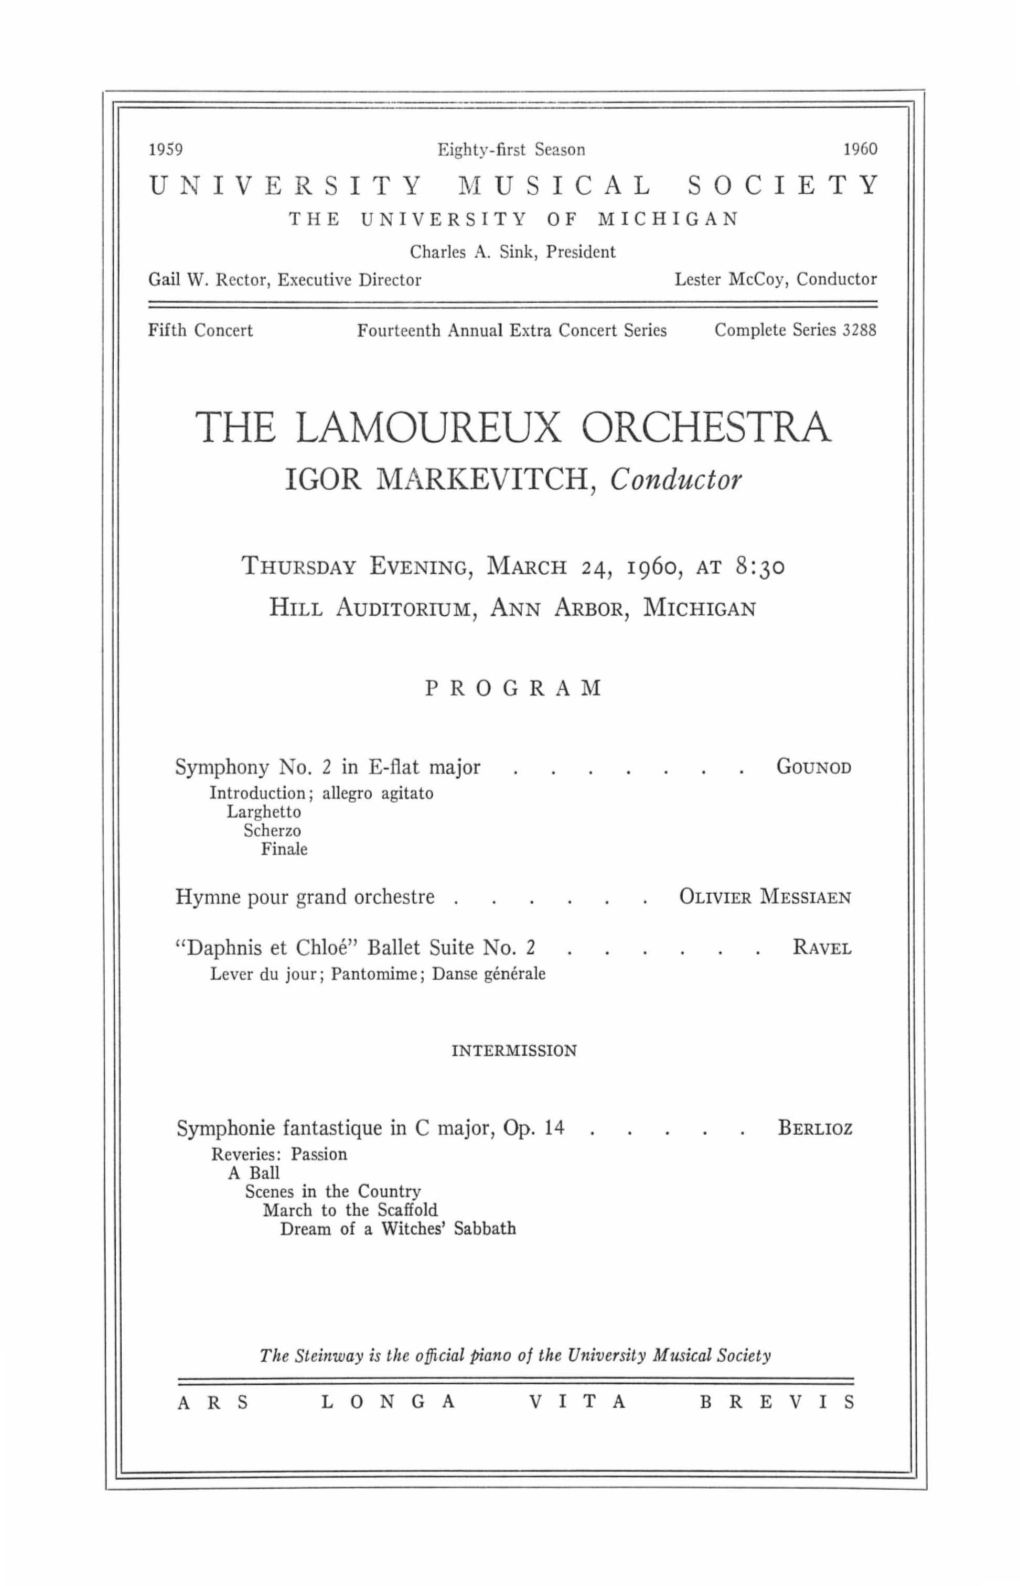 THE LAMOUREUX ORCHESTRA IGOR MARKEVITCH, Conductor